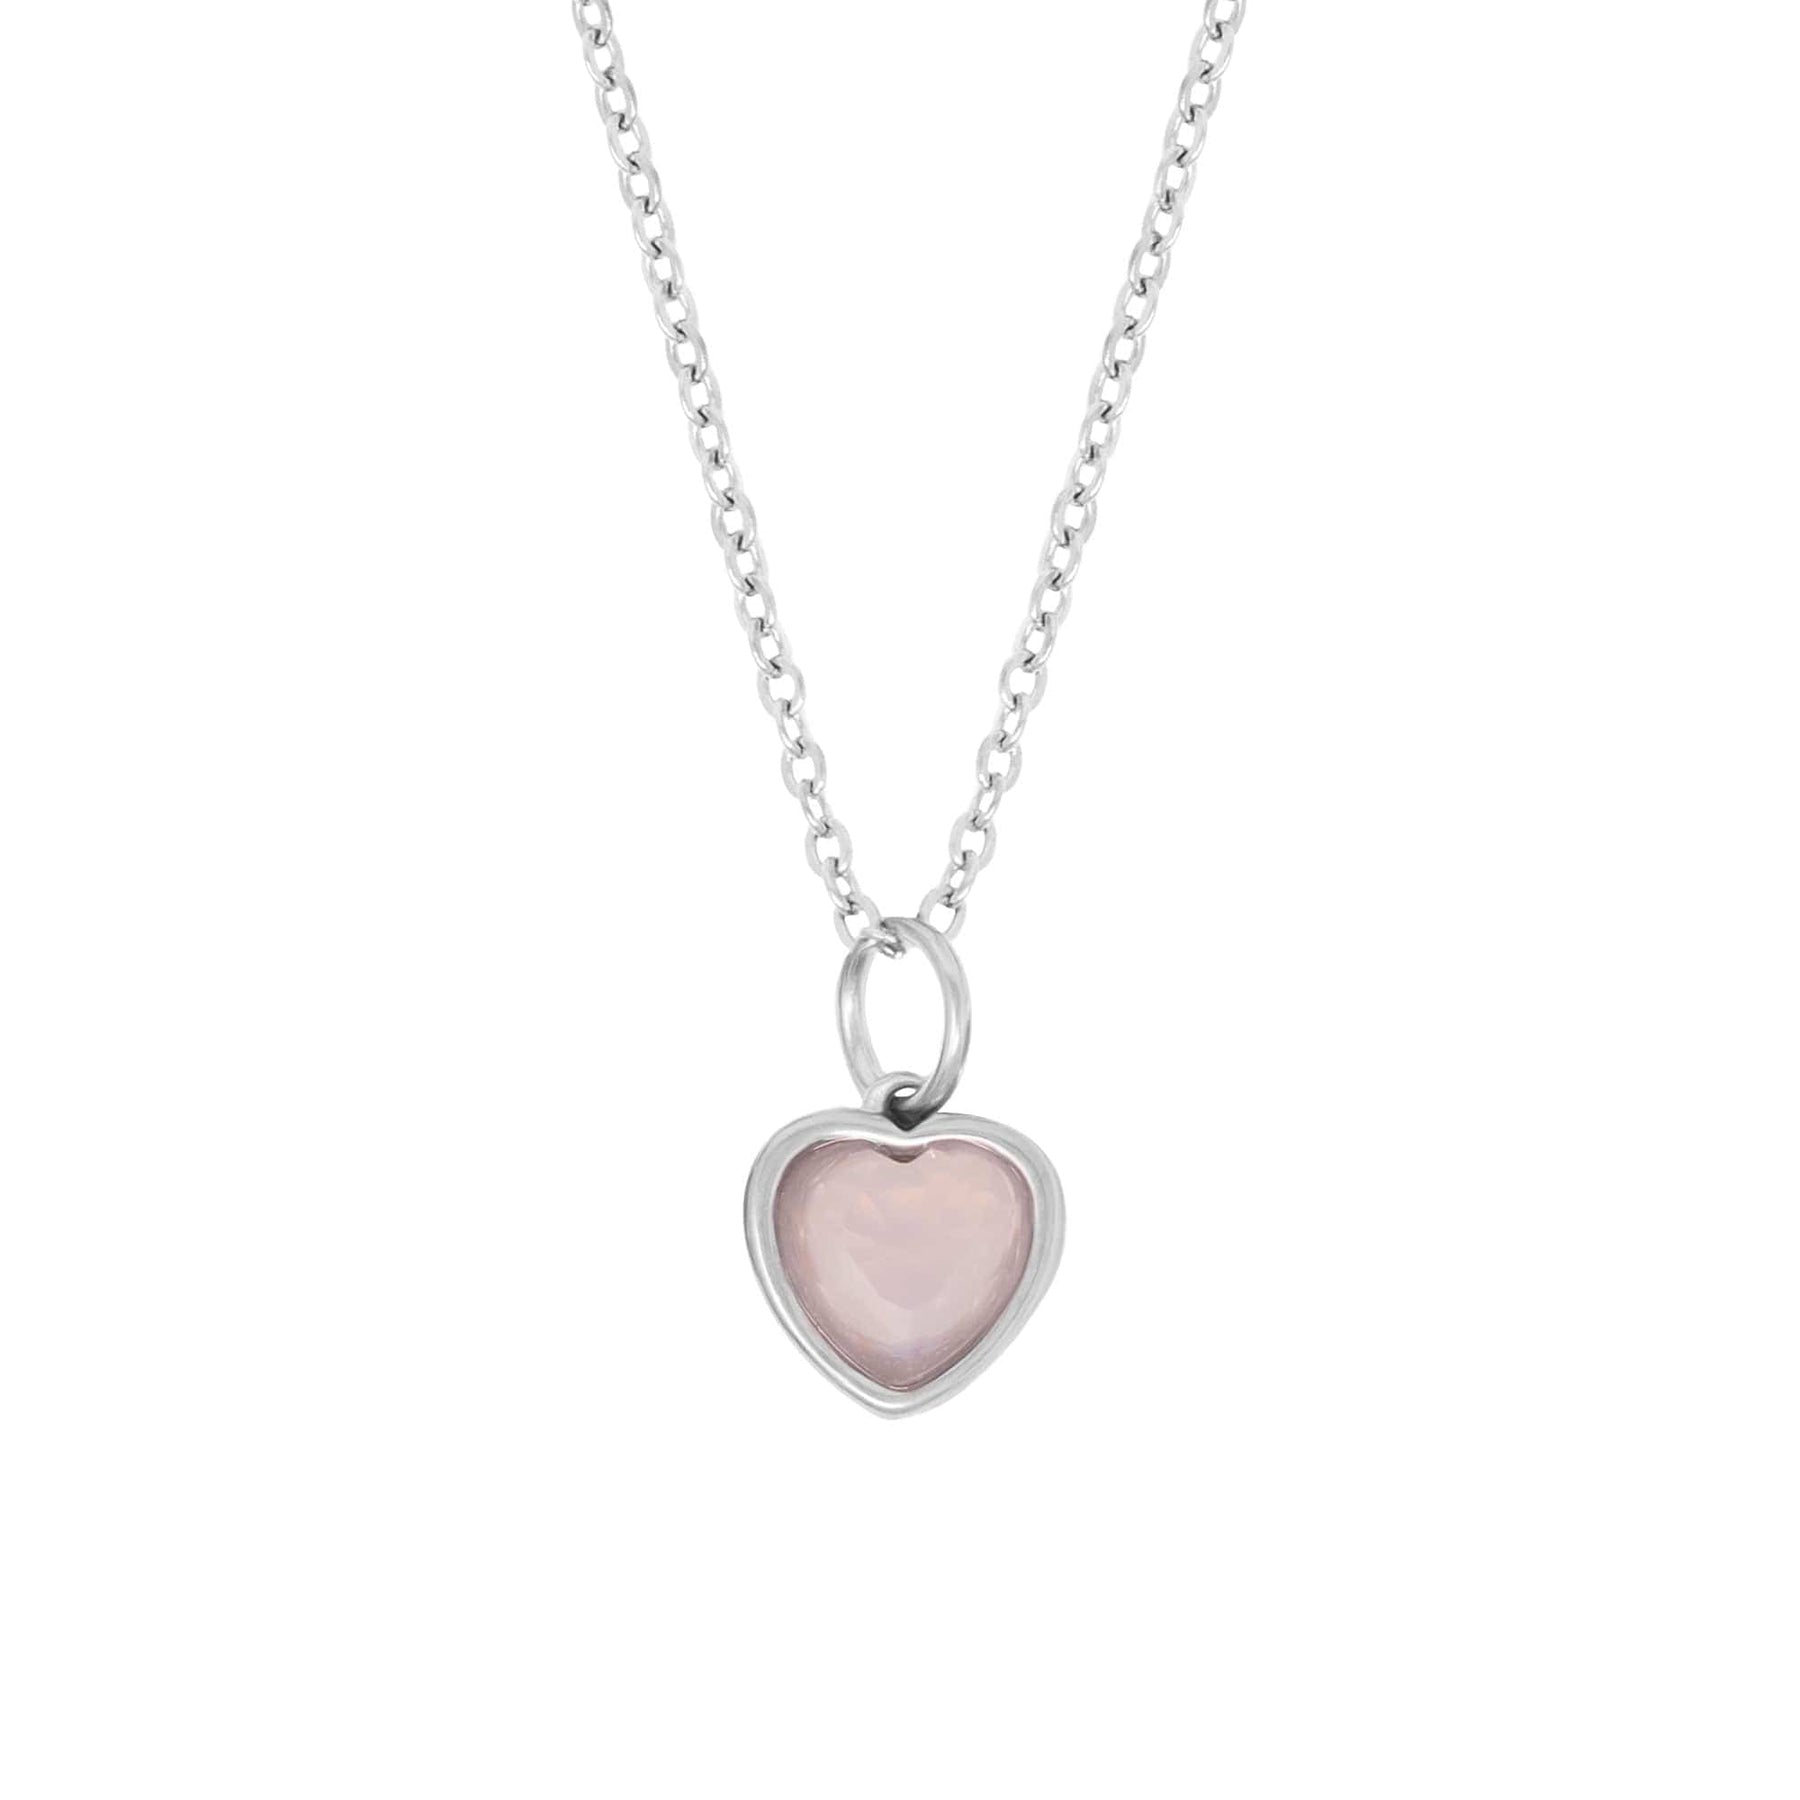 BohoMoon Stainless Steel Love Heart Birthstone Necklace Silver / October